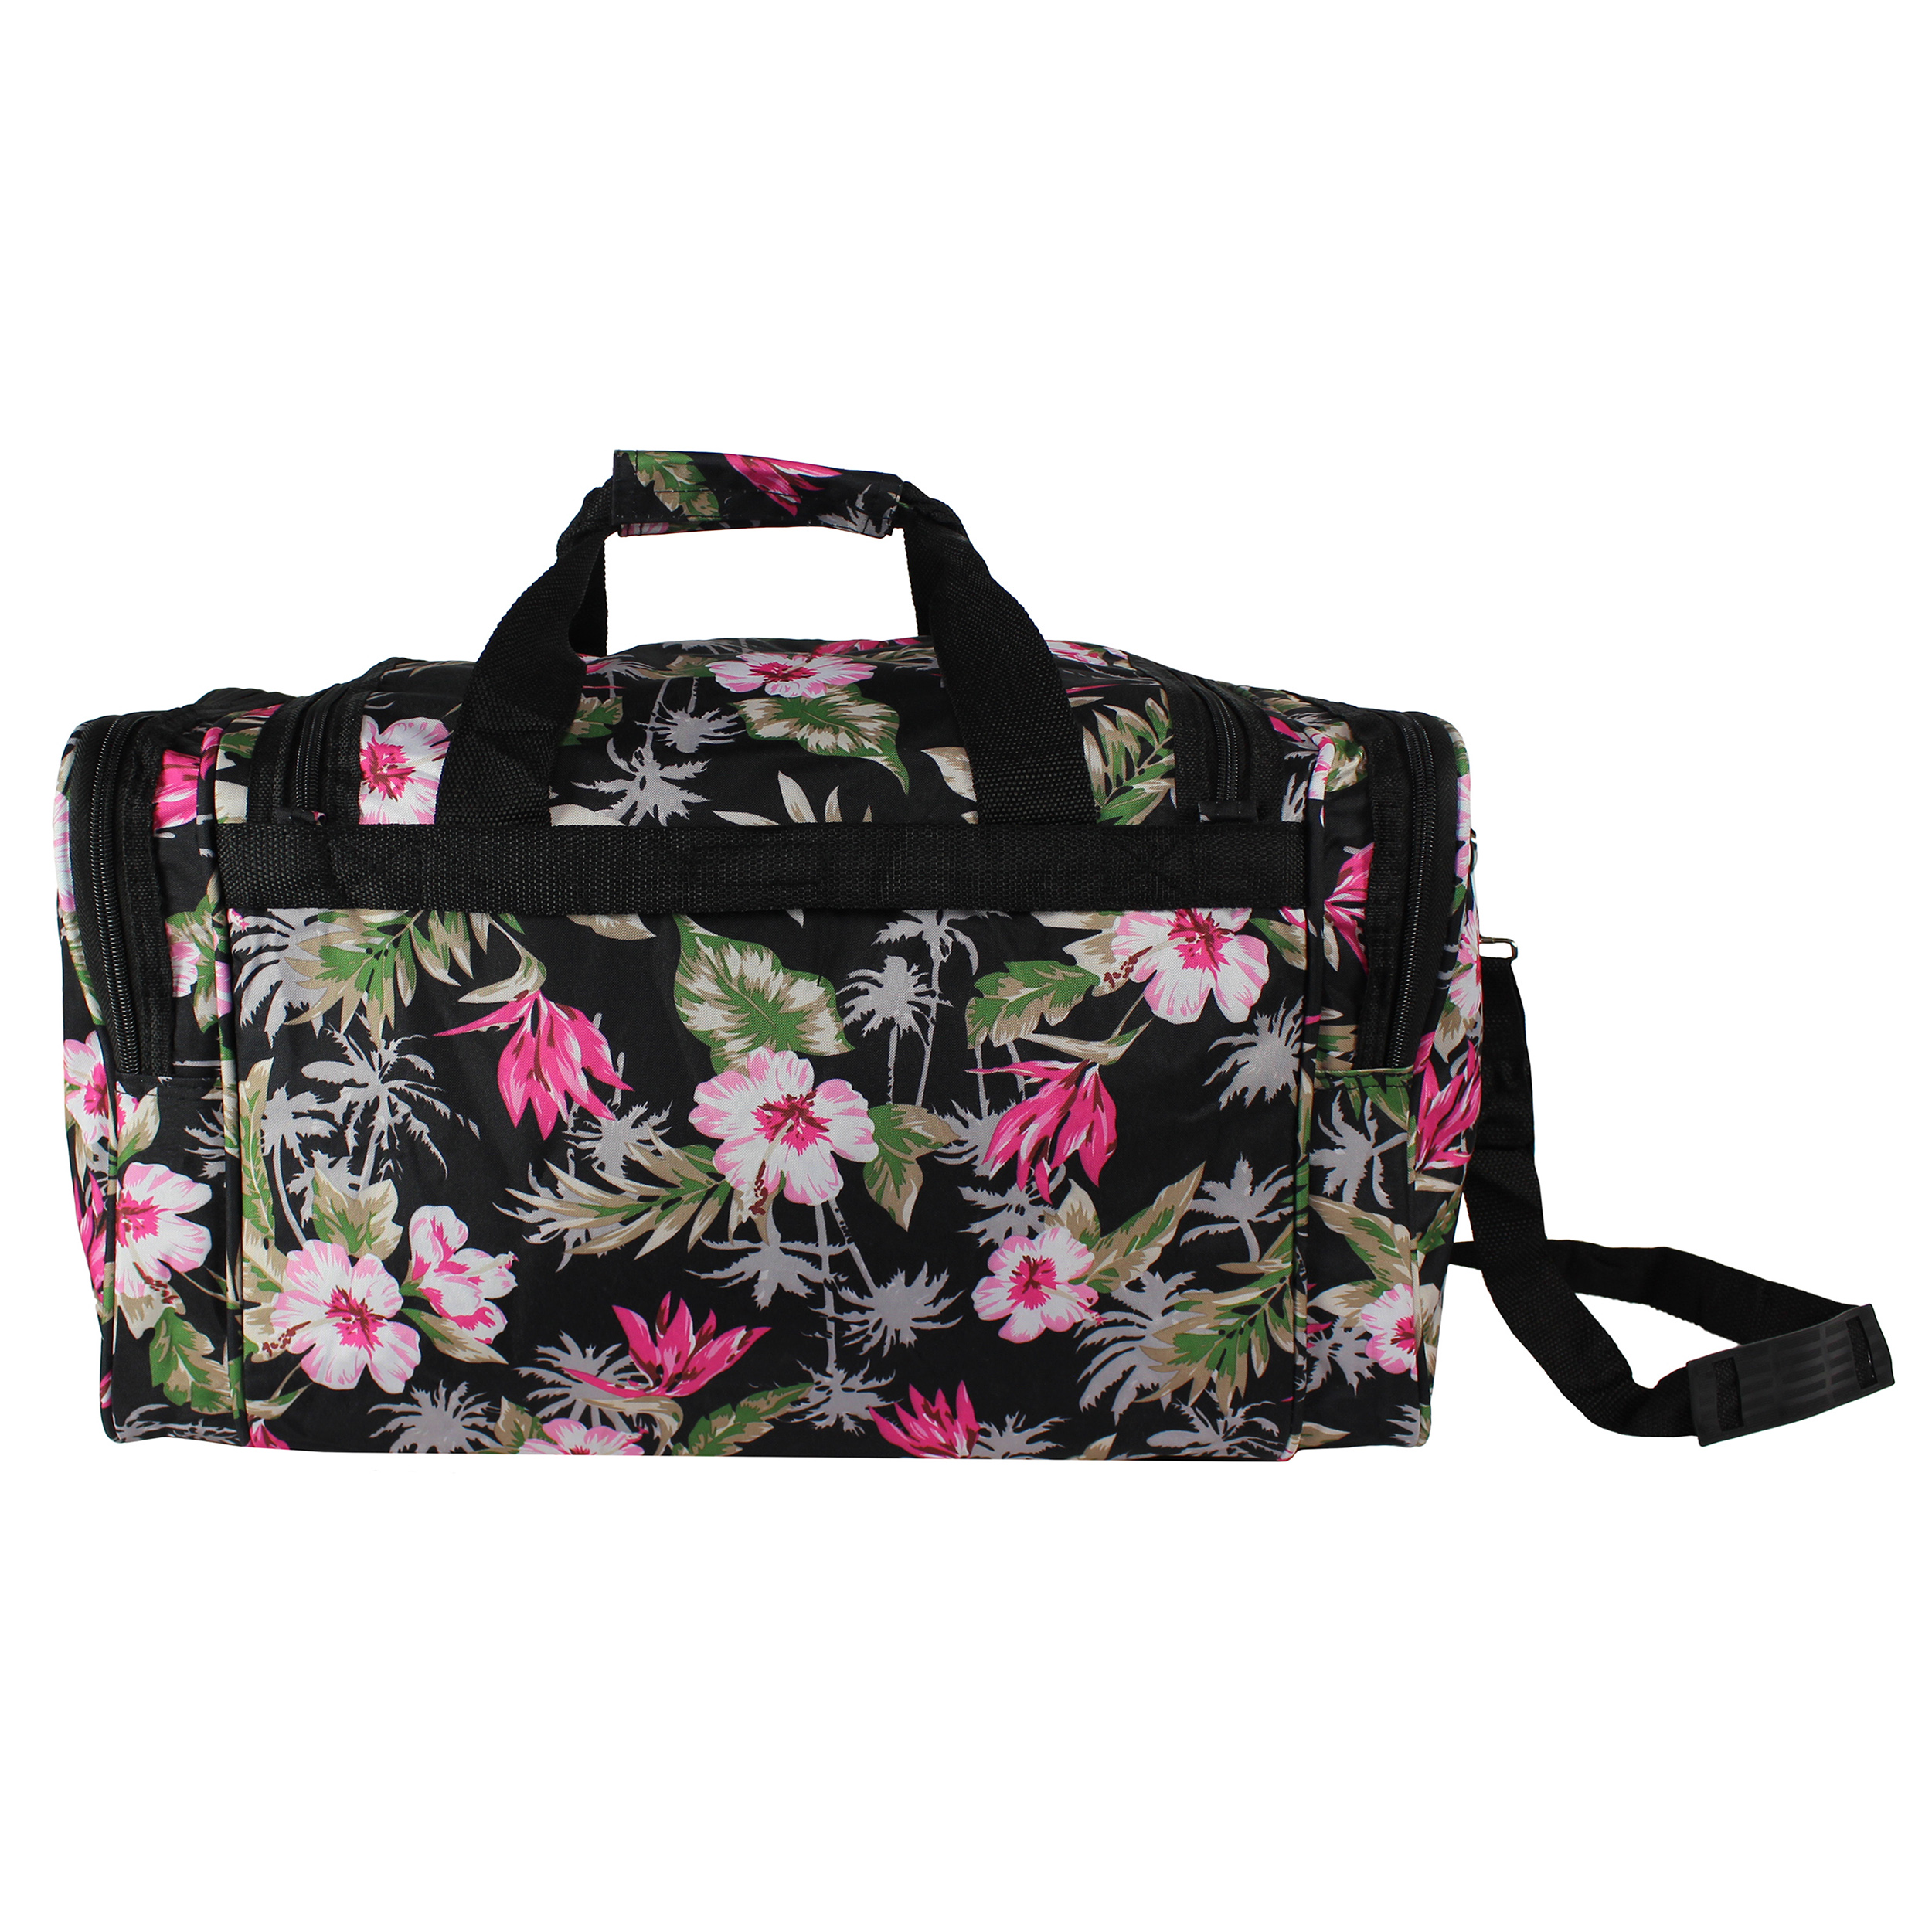 World Traveler 22-Inch Carry-On Duffel Bag - Tropical Flowers - image 2 of 2